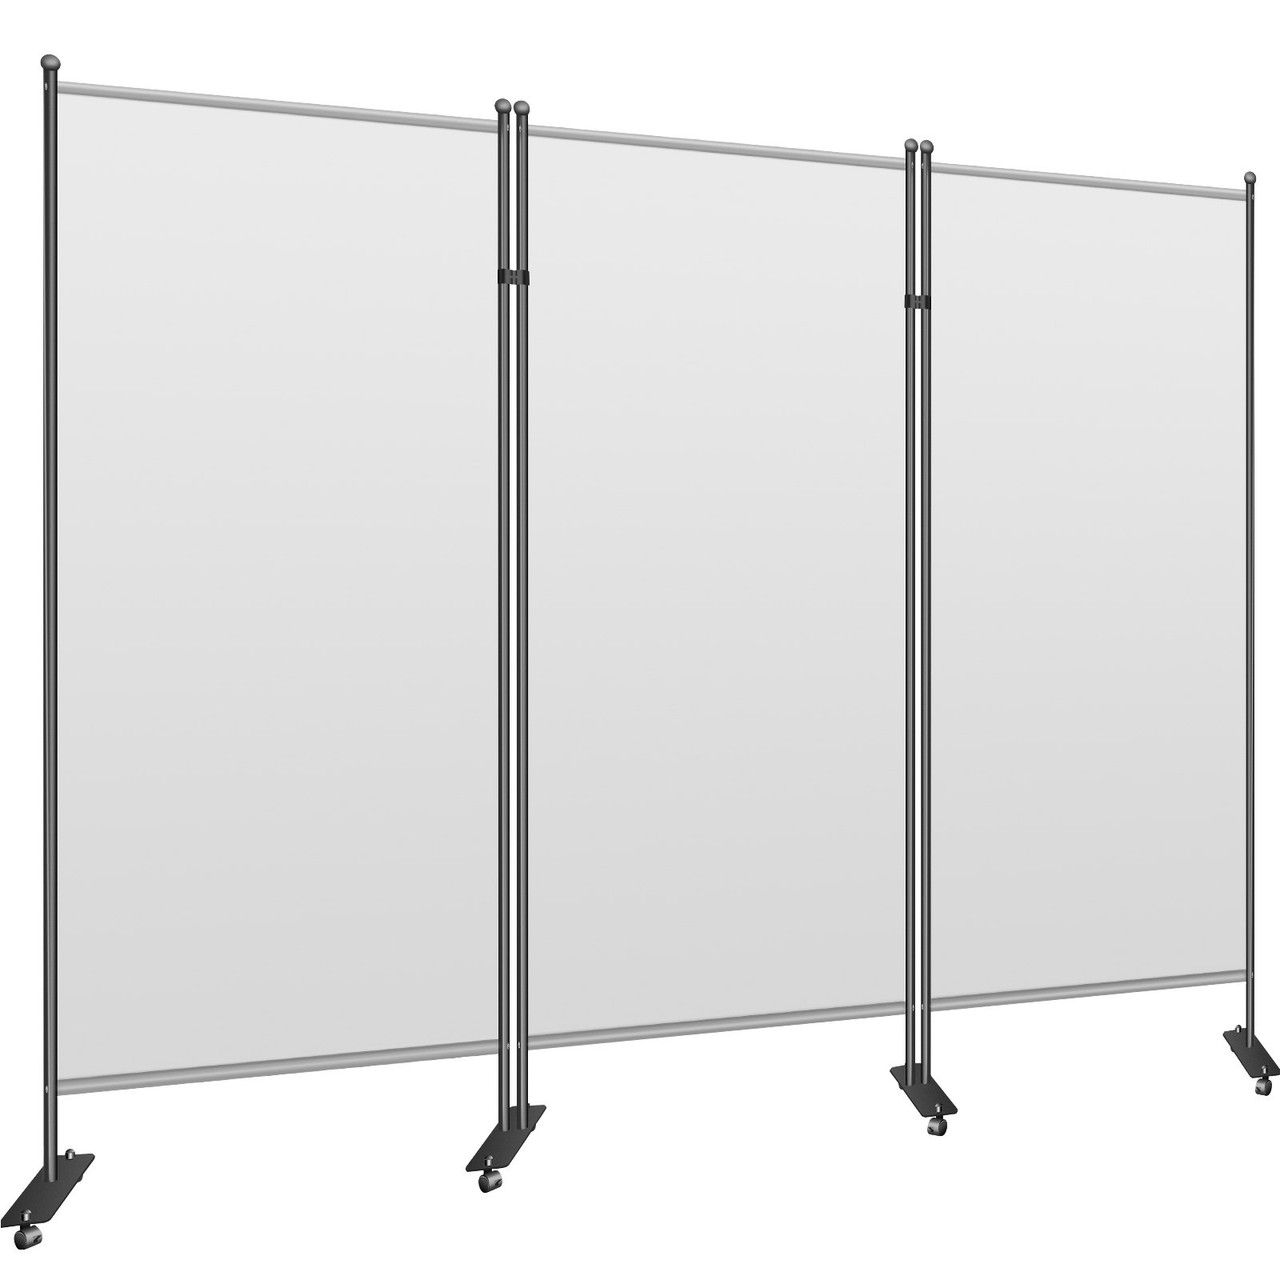 Office Partition 216" W x 14" D x 72" H Room Divider 3-Panel Office Divider Folding Portable Office Wall with Non-See-Through Fabric Room Partition